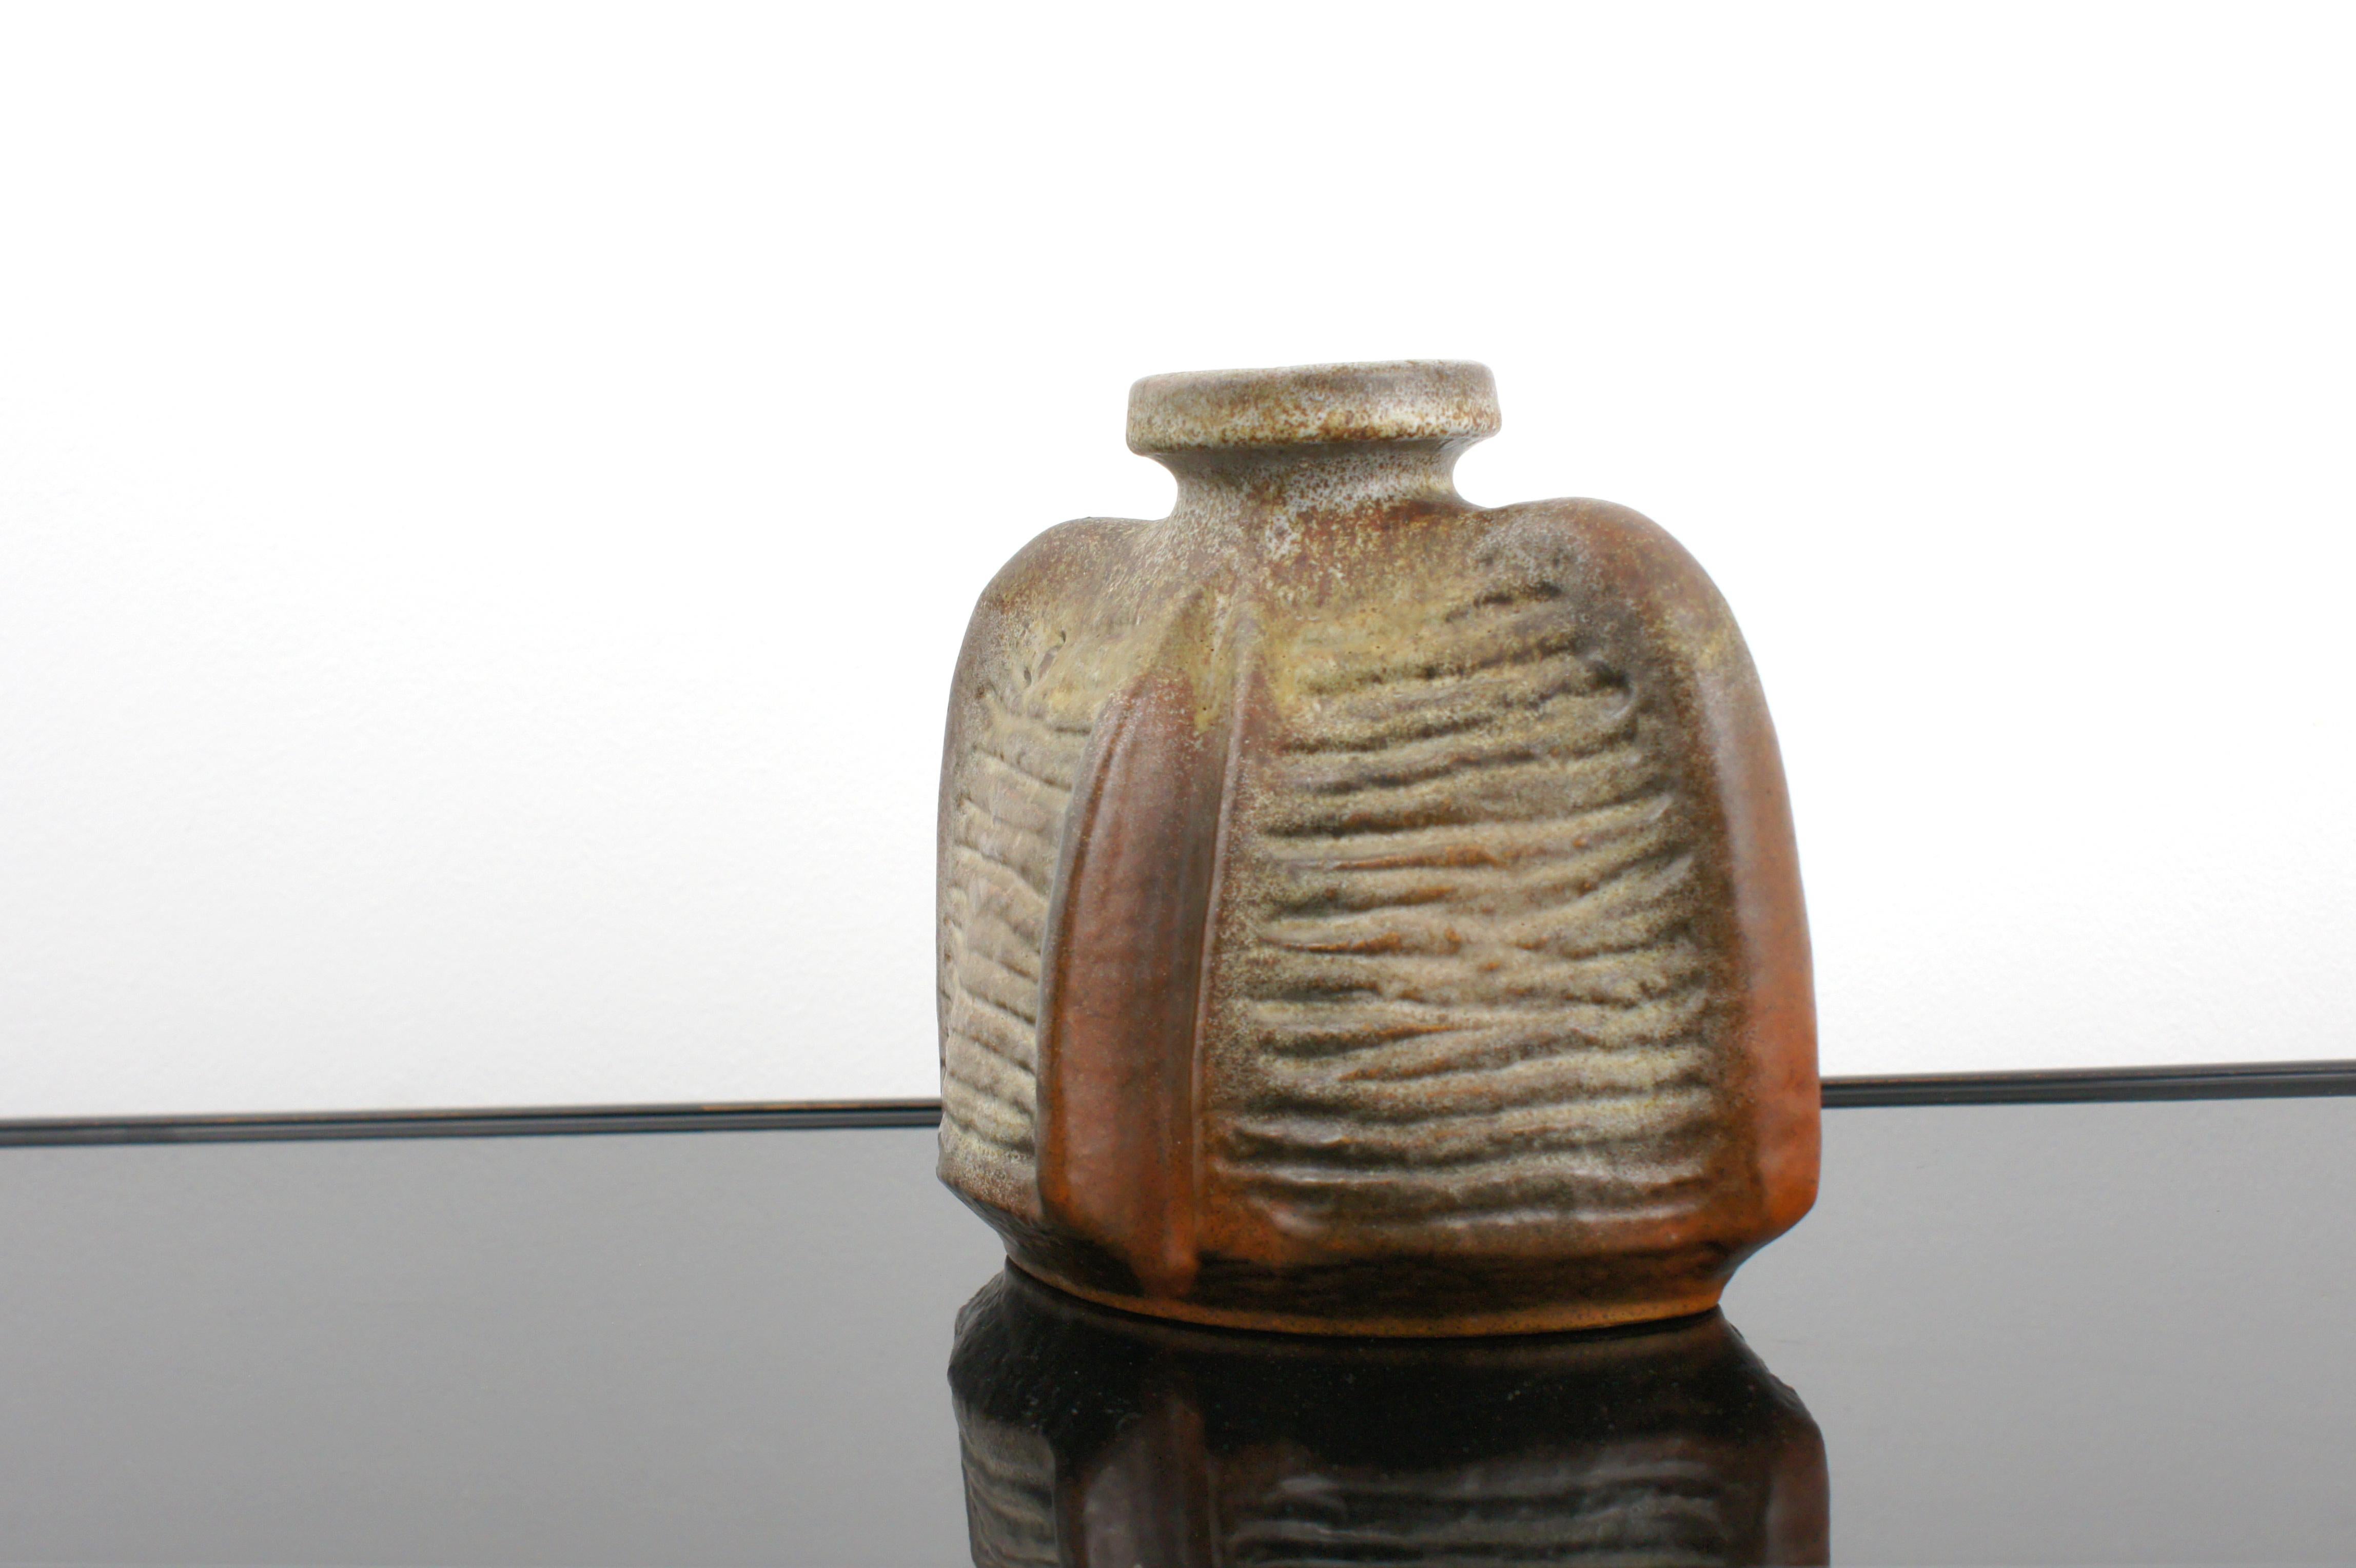 German-made 'fat lava' vase from the 1960s. 
Designed by Rudolf Christmann for Carstens Tonnieshof.

Manufacturer and series identifier stamped on the bottom.

Perfect condition, collectible